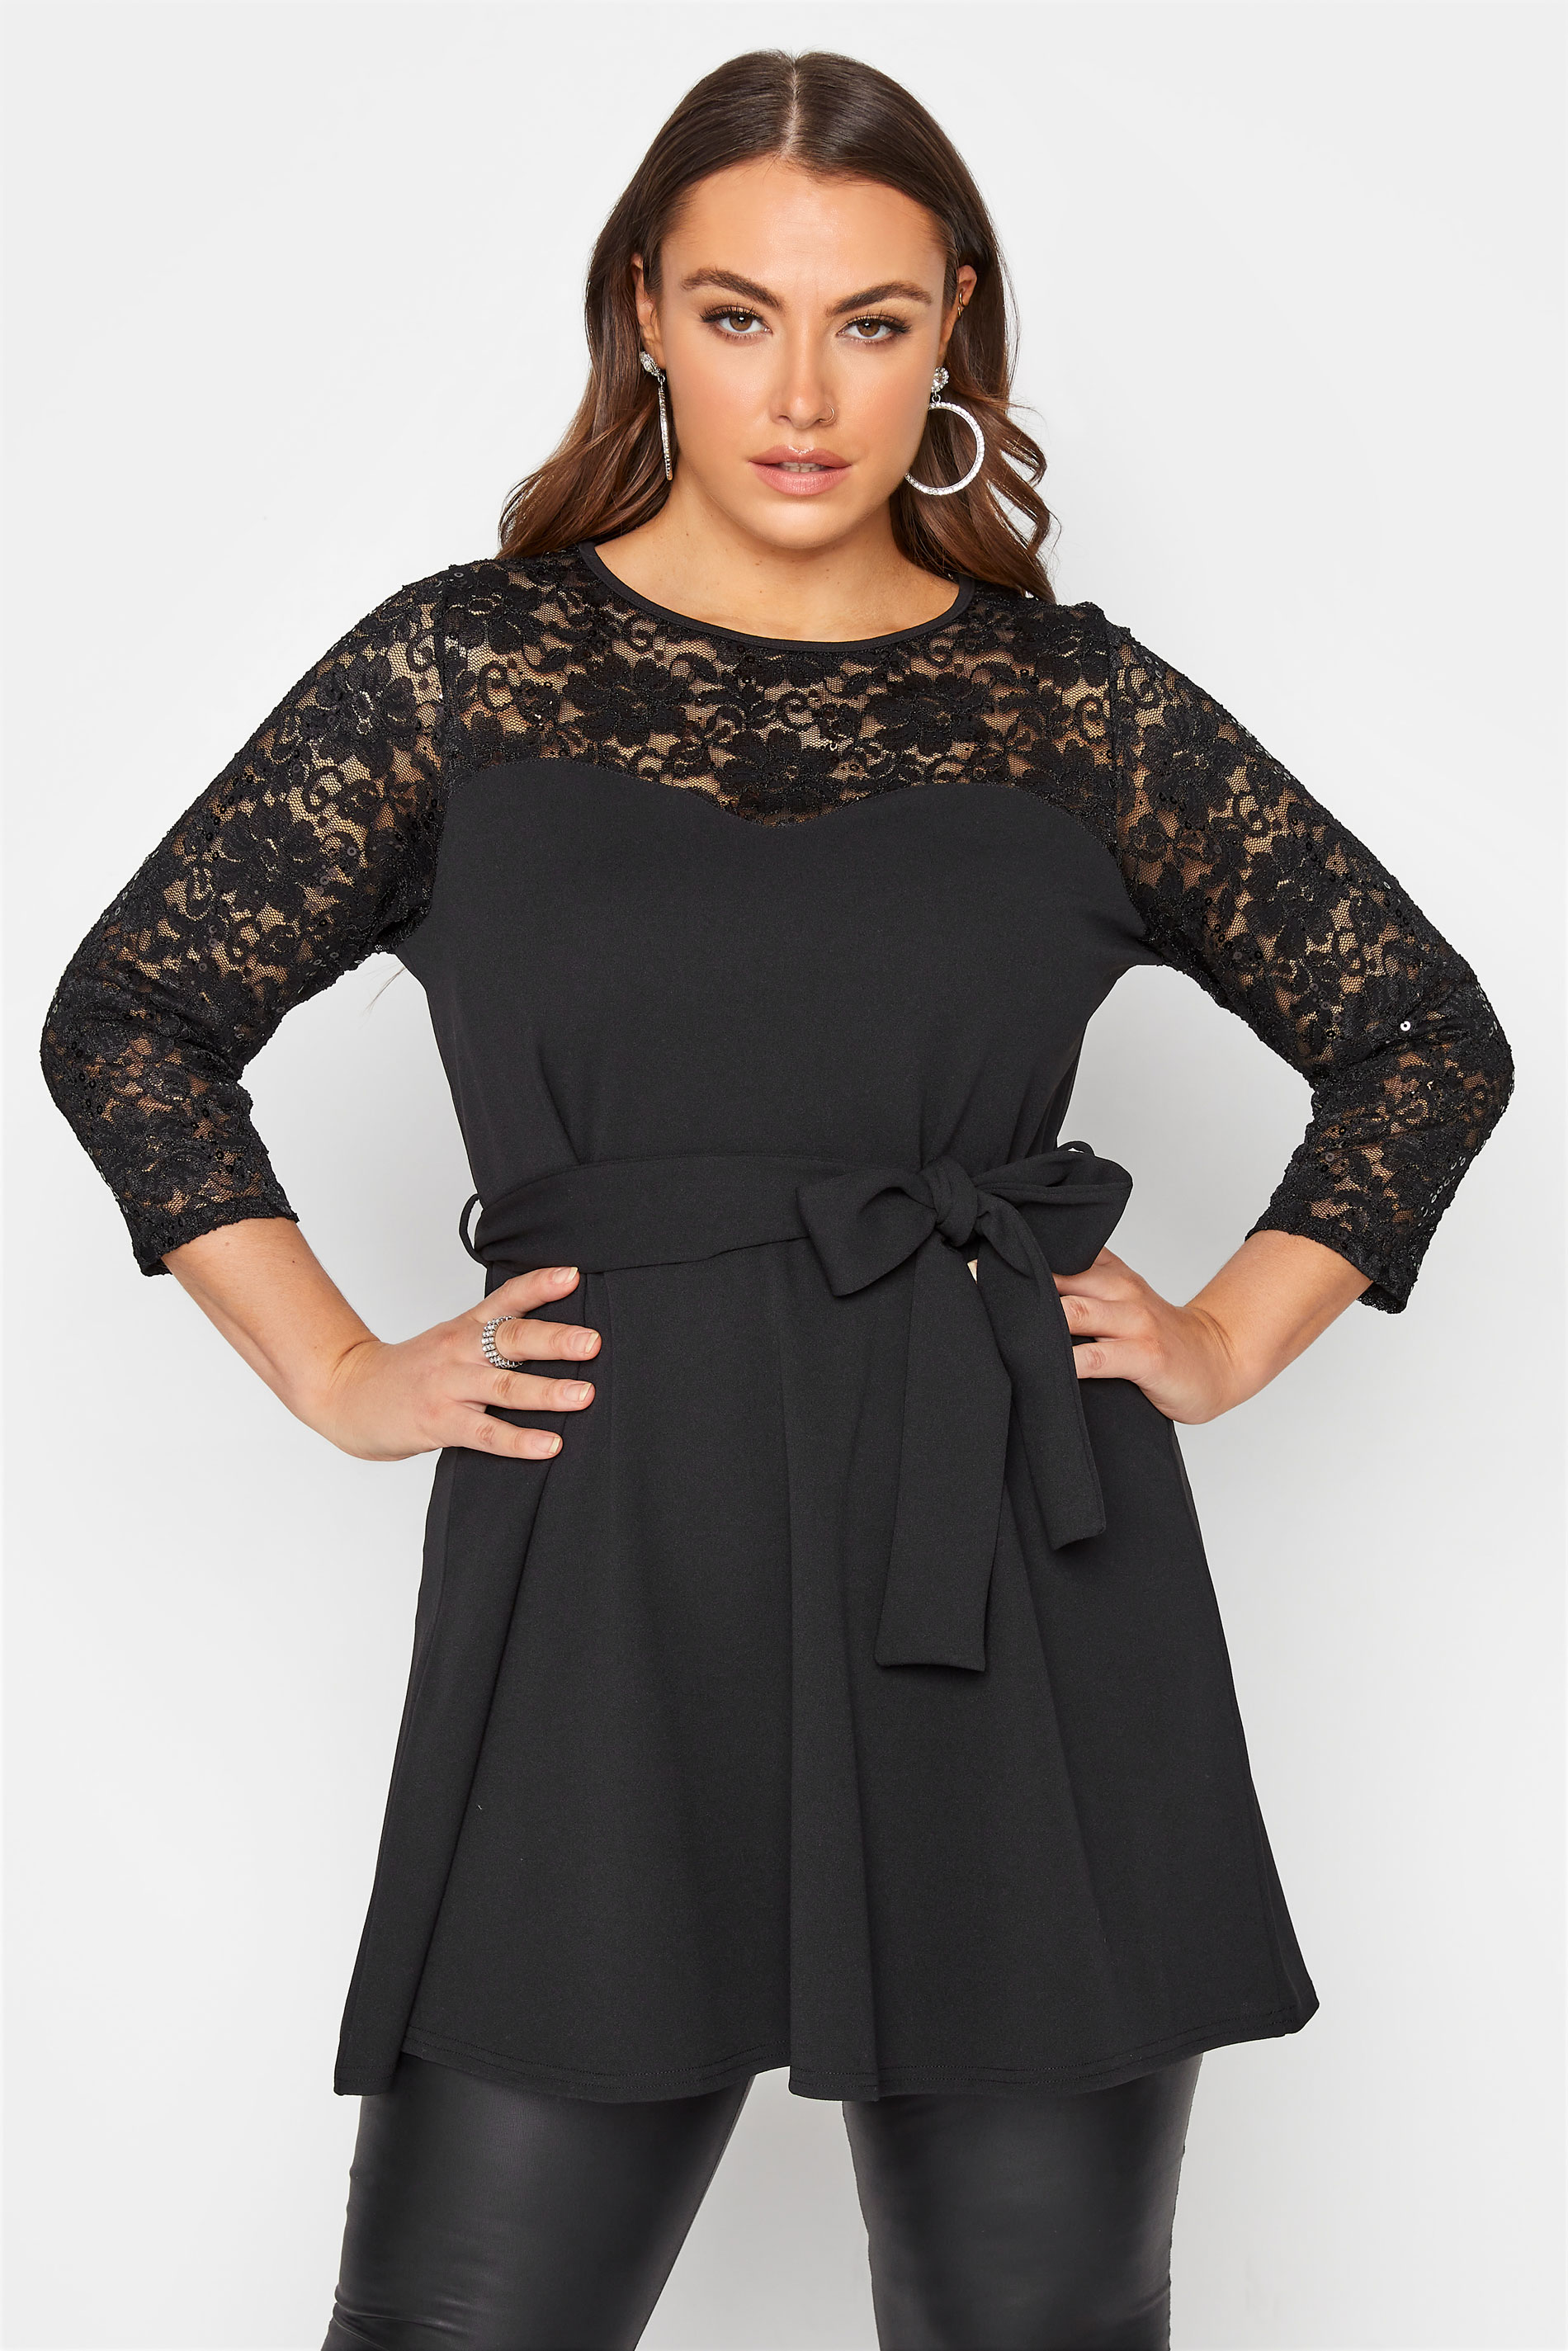 YOURS LONDON Black Embellished Lace Peplum Top_A.jpg